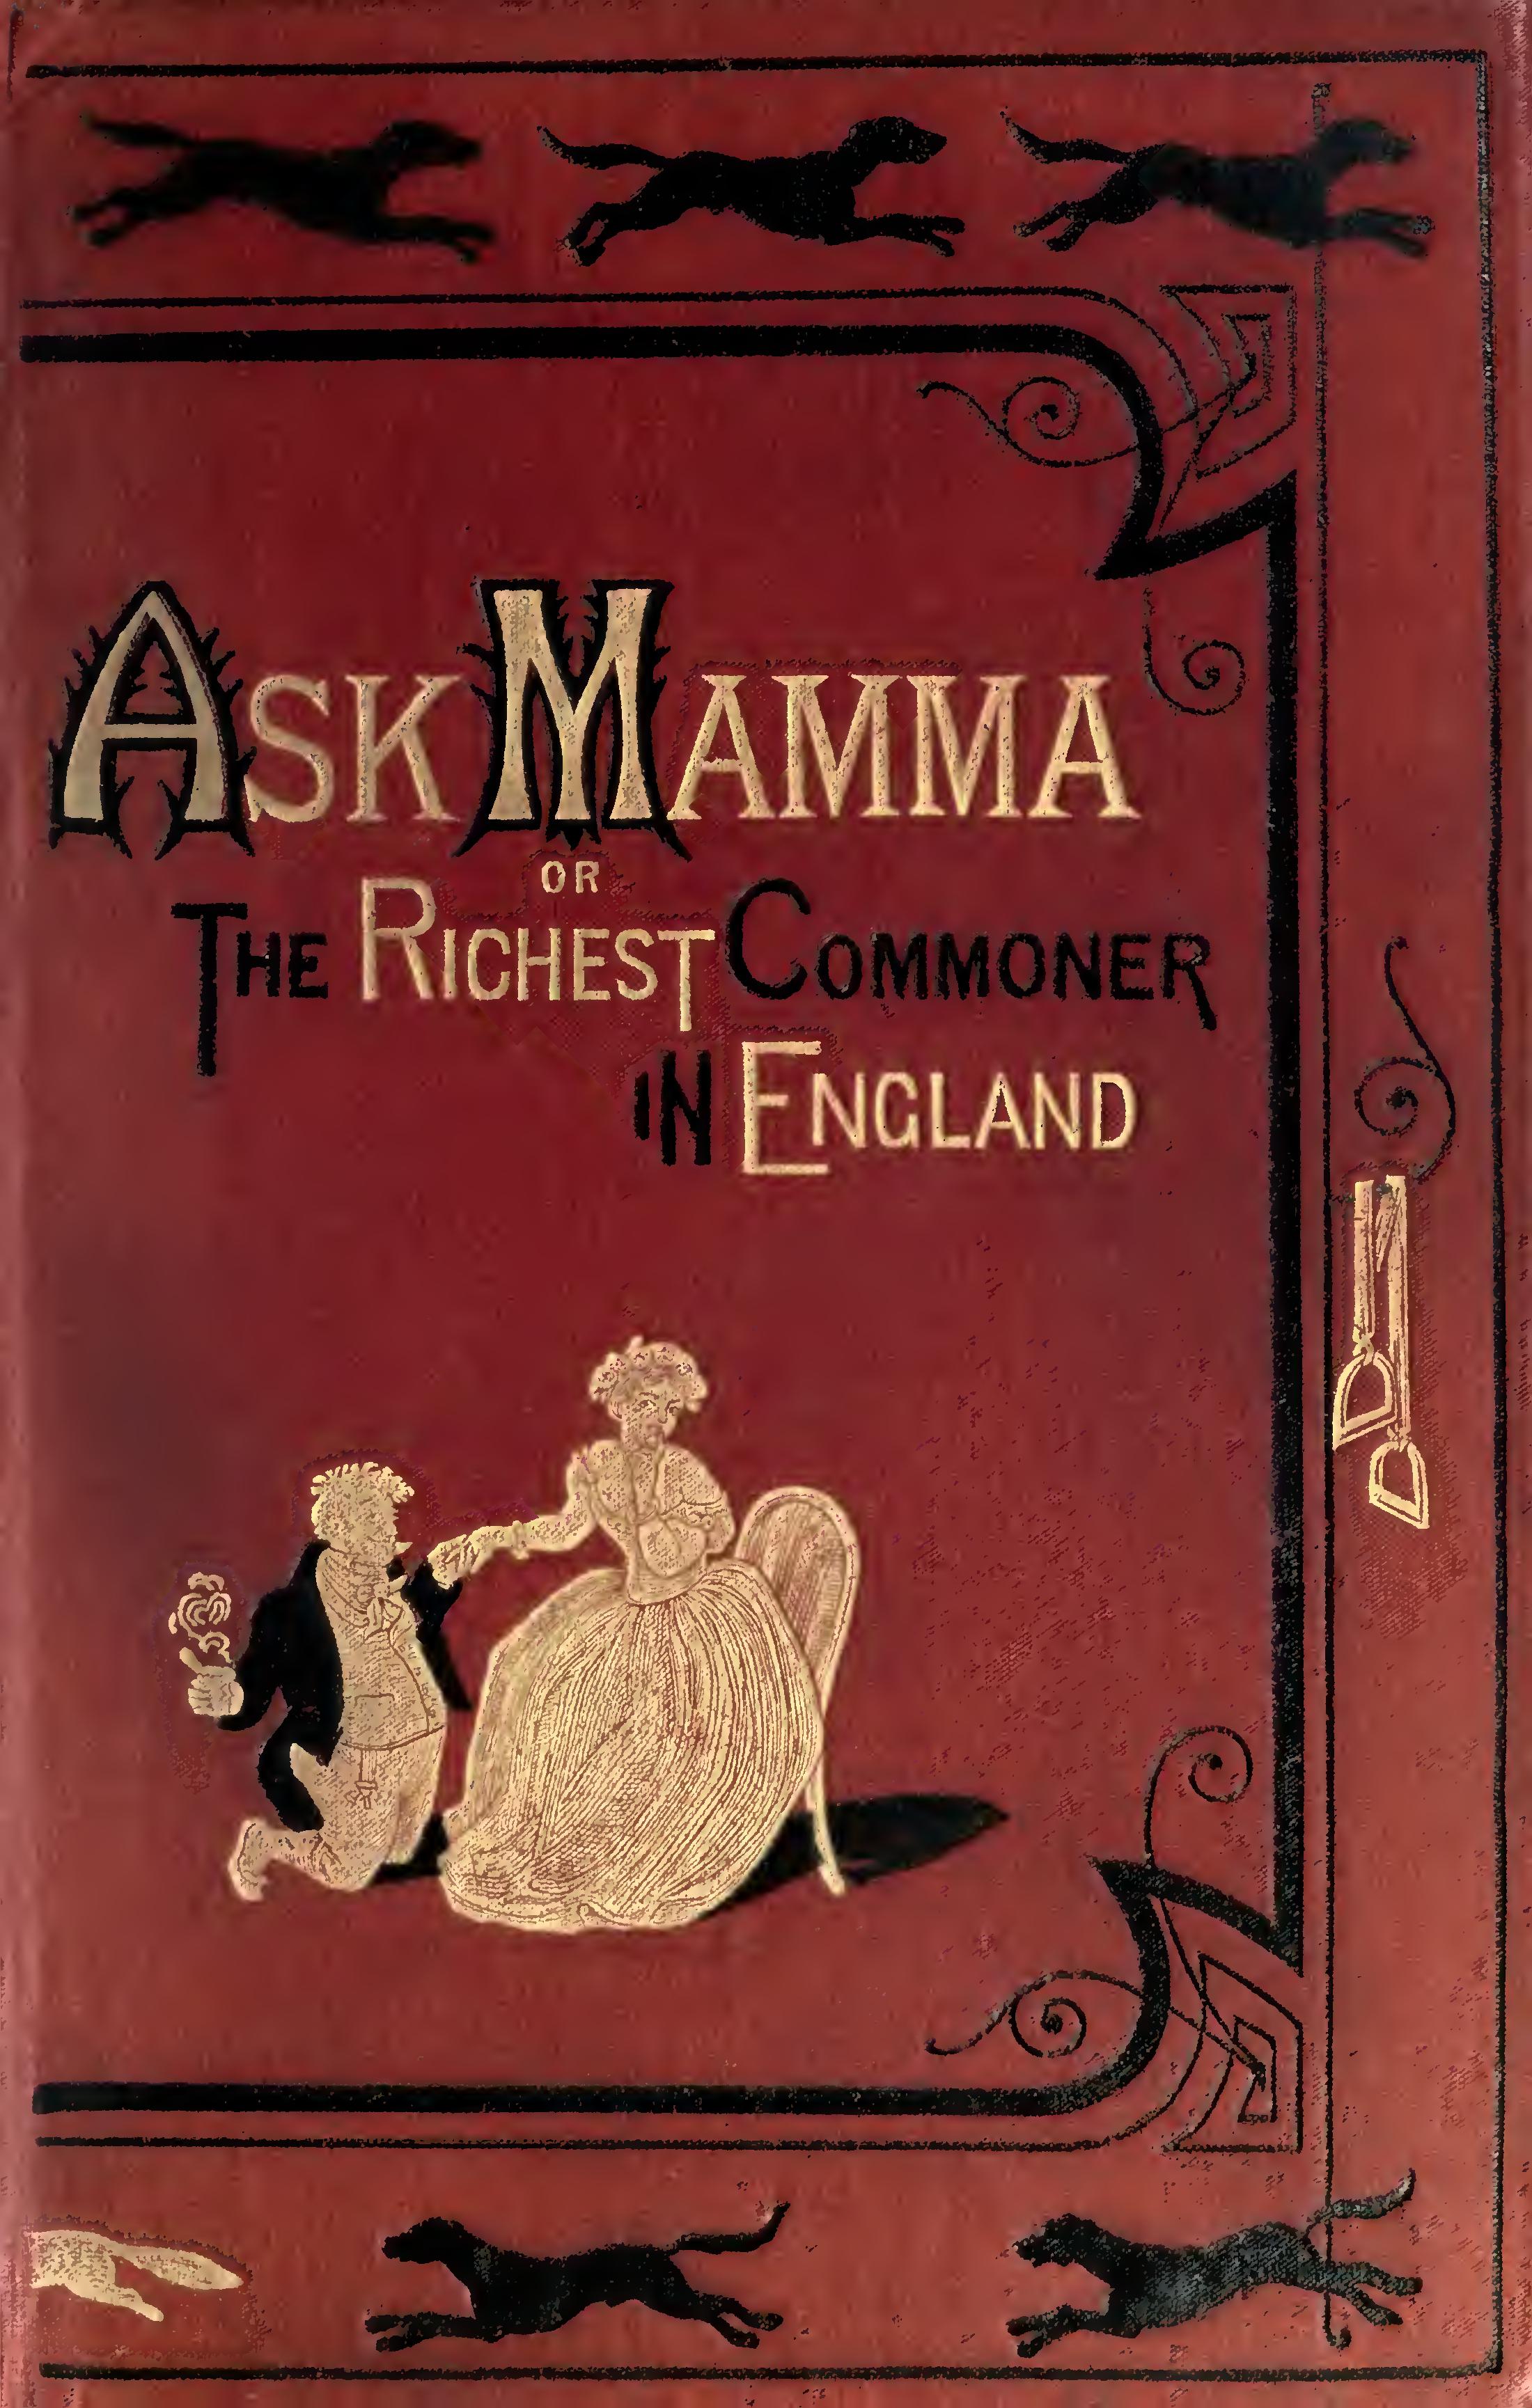 Ask Mamma, Or the Richest Commoner in England, by R